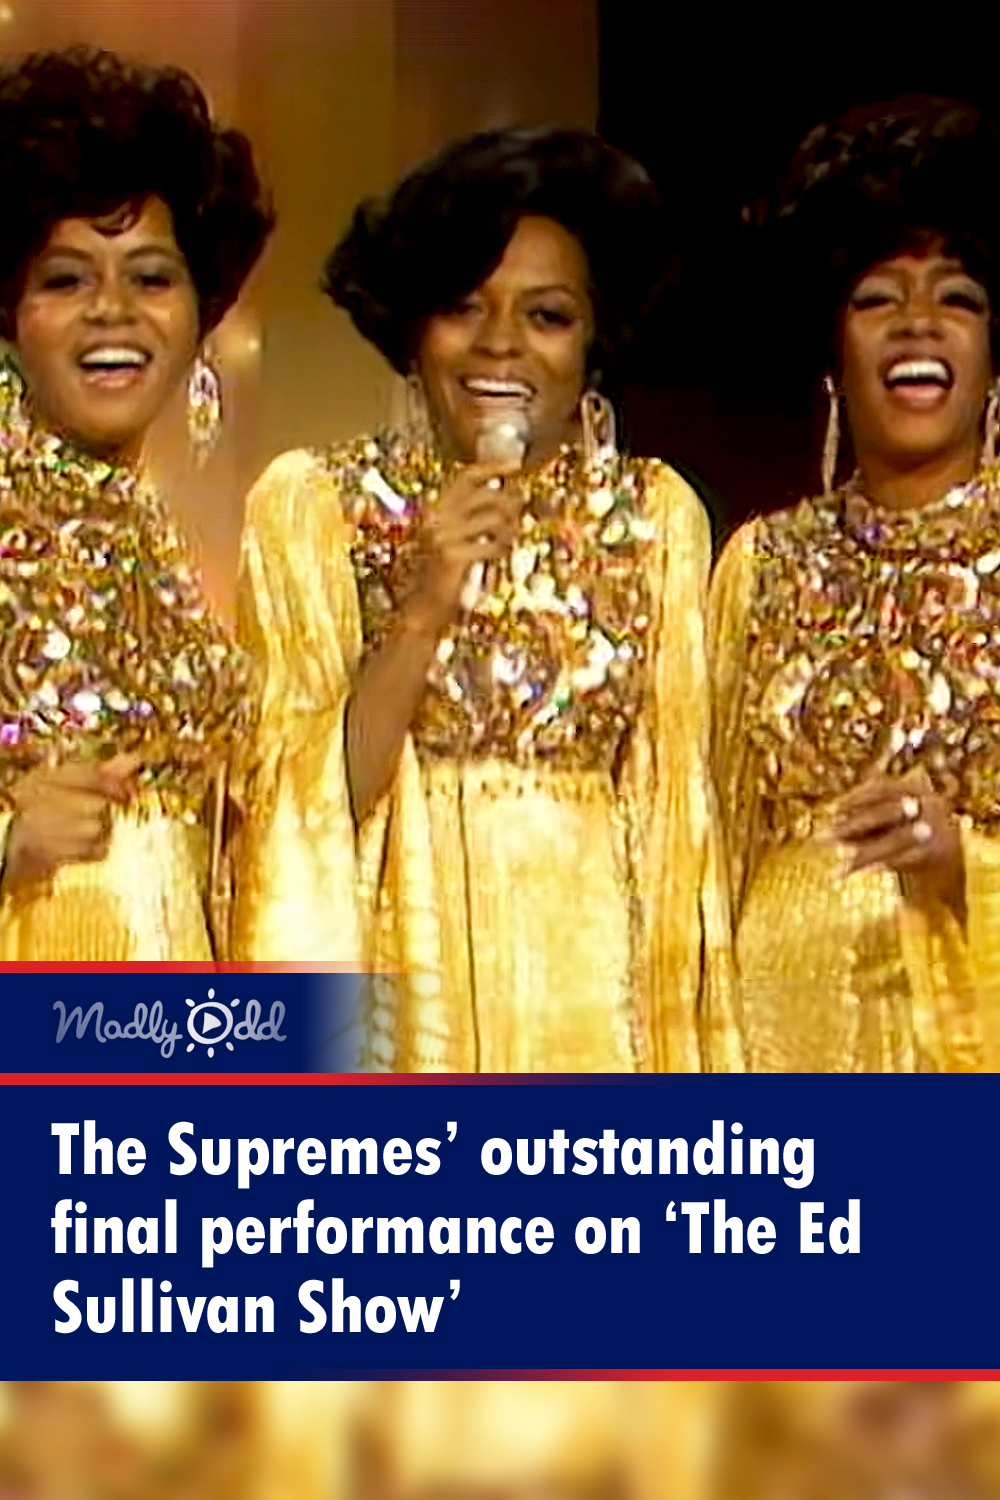 The Supremes’ outstanding performance on the Ed Sullivan Show